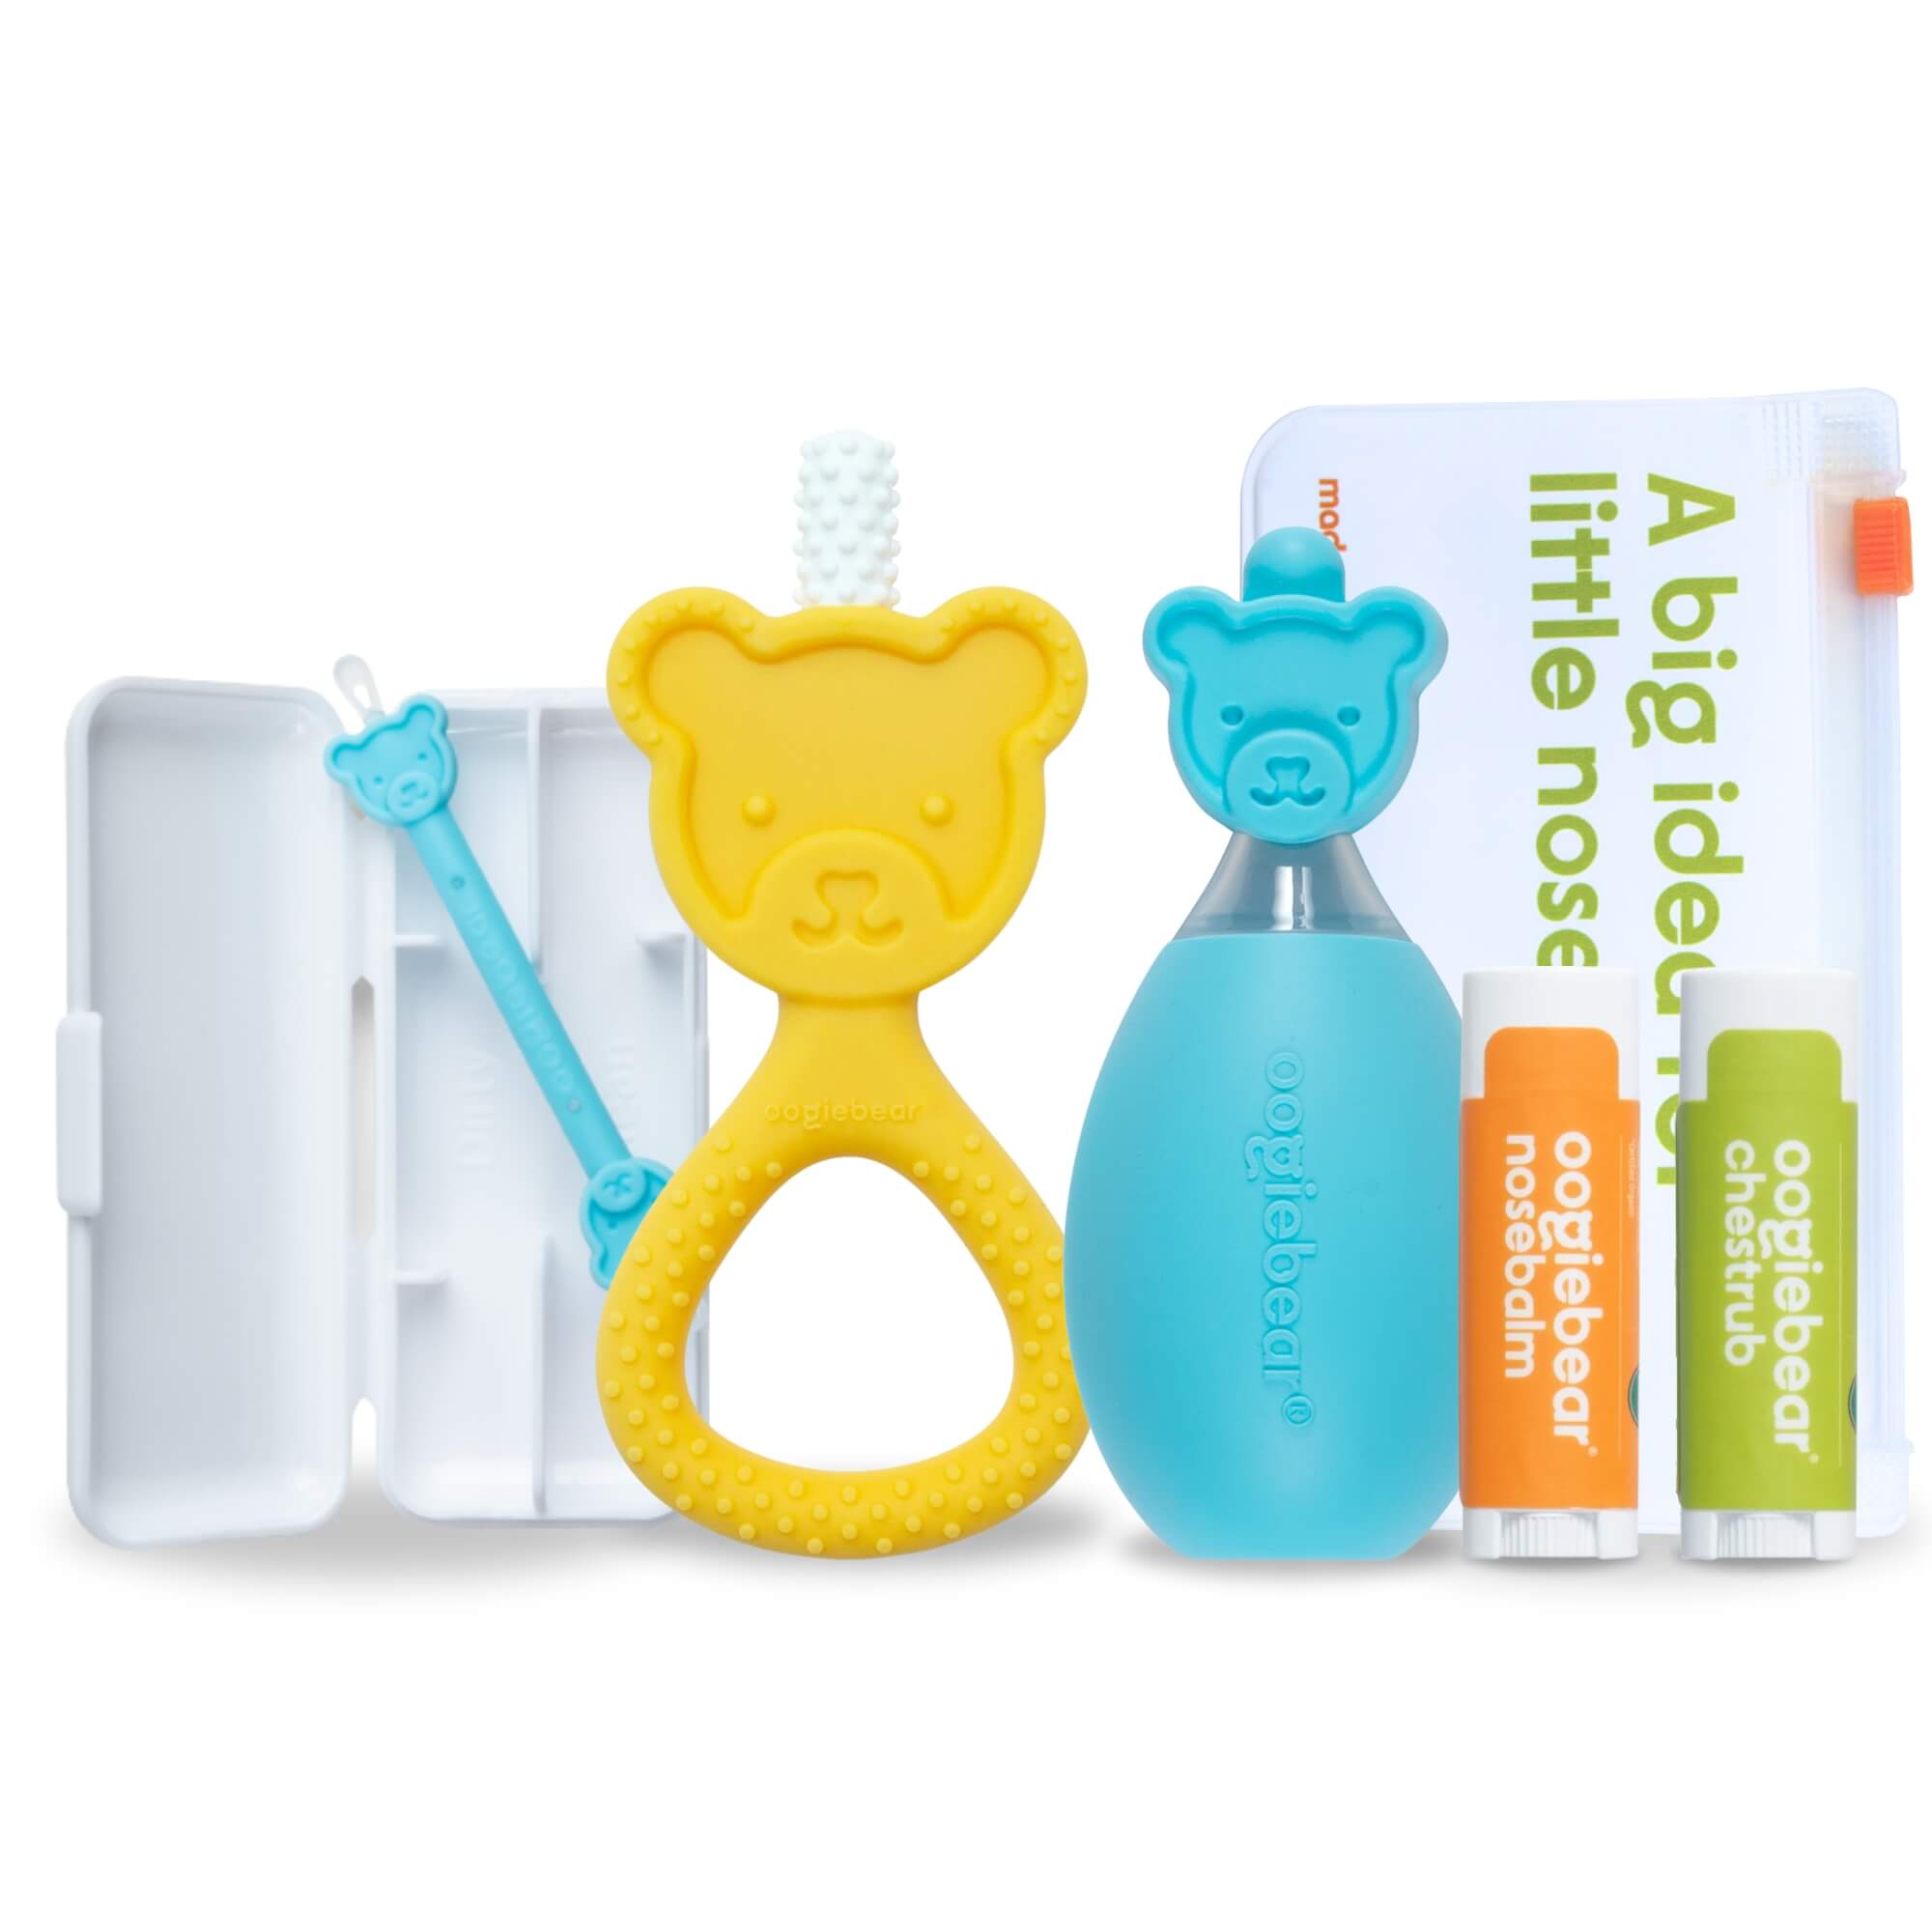 oogiebear comfy beginnings kit comes with 4 products in one great bundle for new parents!